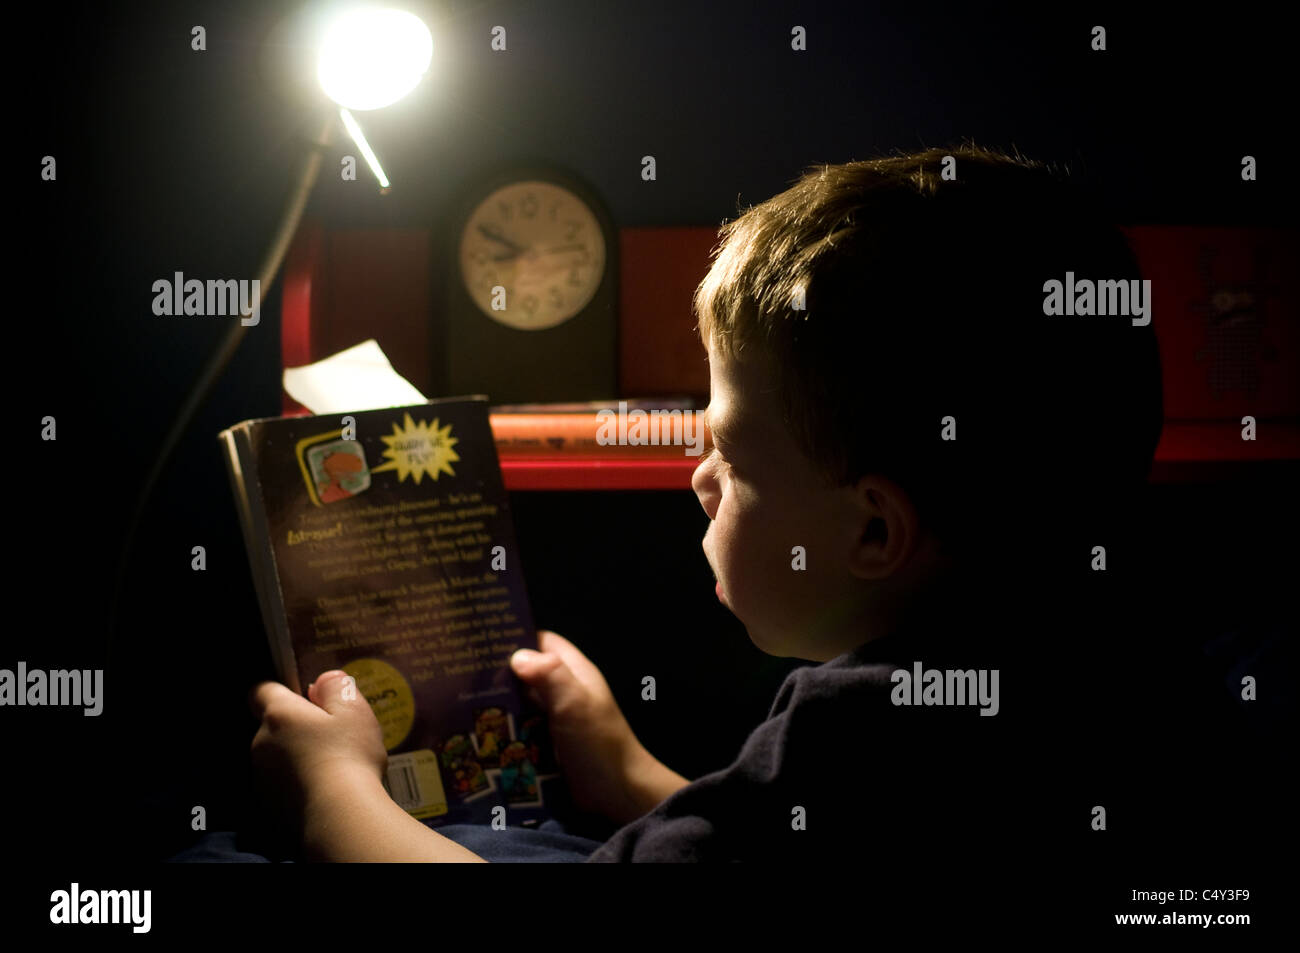 Book at Bedtime a seven year old boy reading a book in his bed using a lamp,young boy reading at night,Family, ingenuity to read Stock Photo